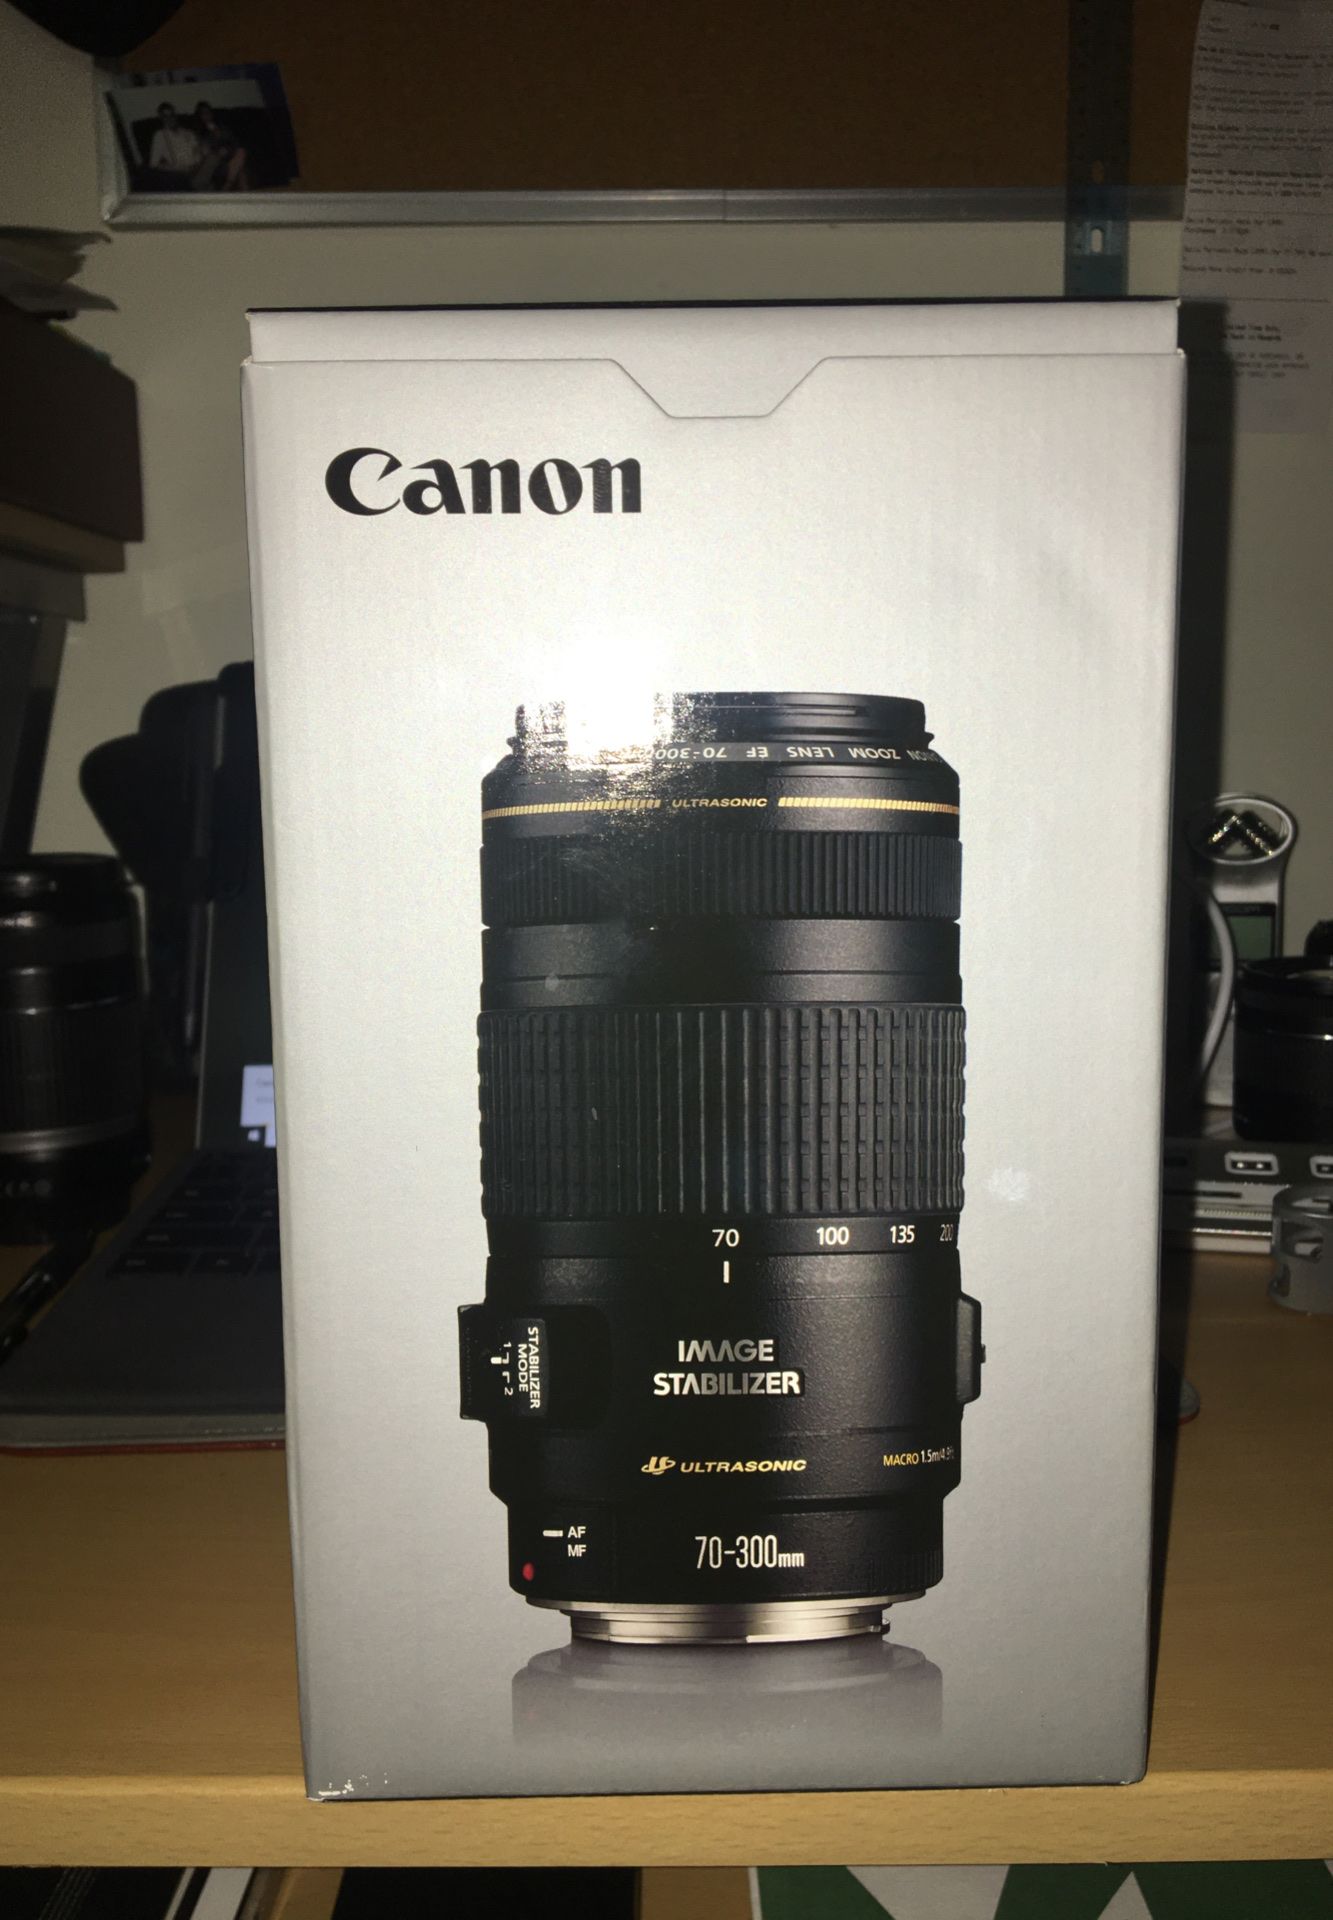 Brand new Canon 70-300 mm F/4-5.6 IS USM